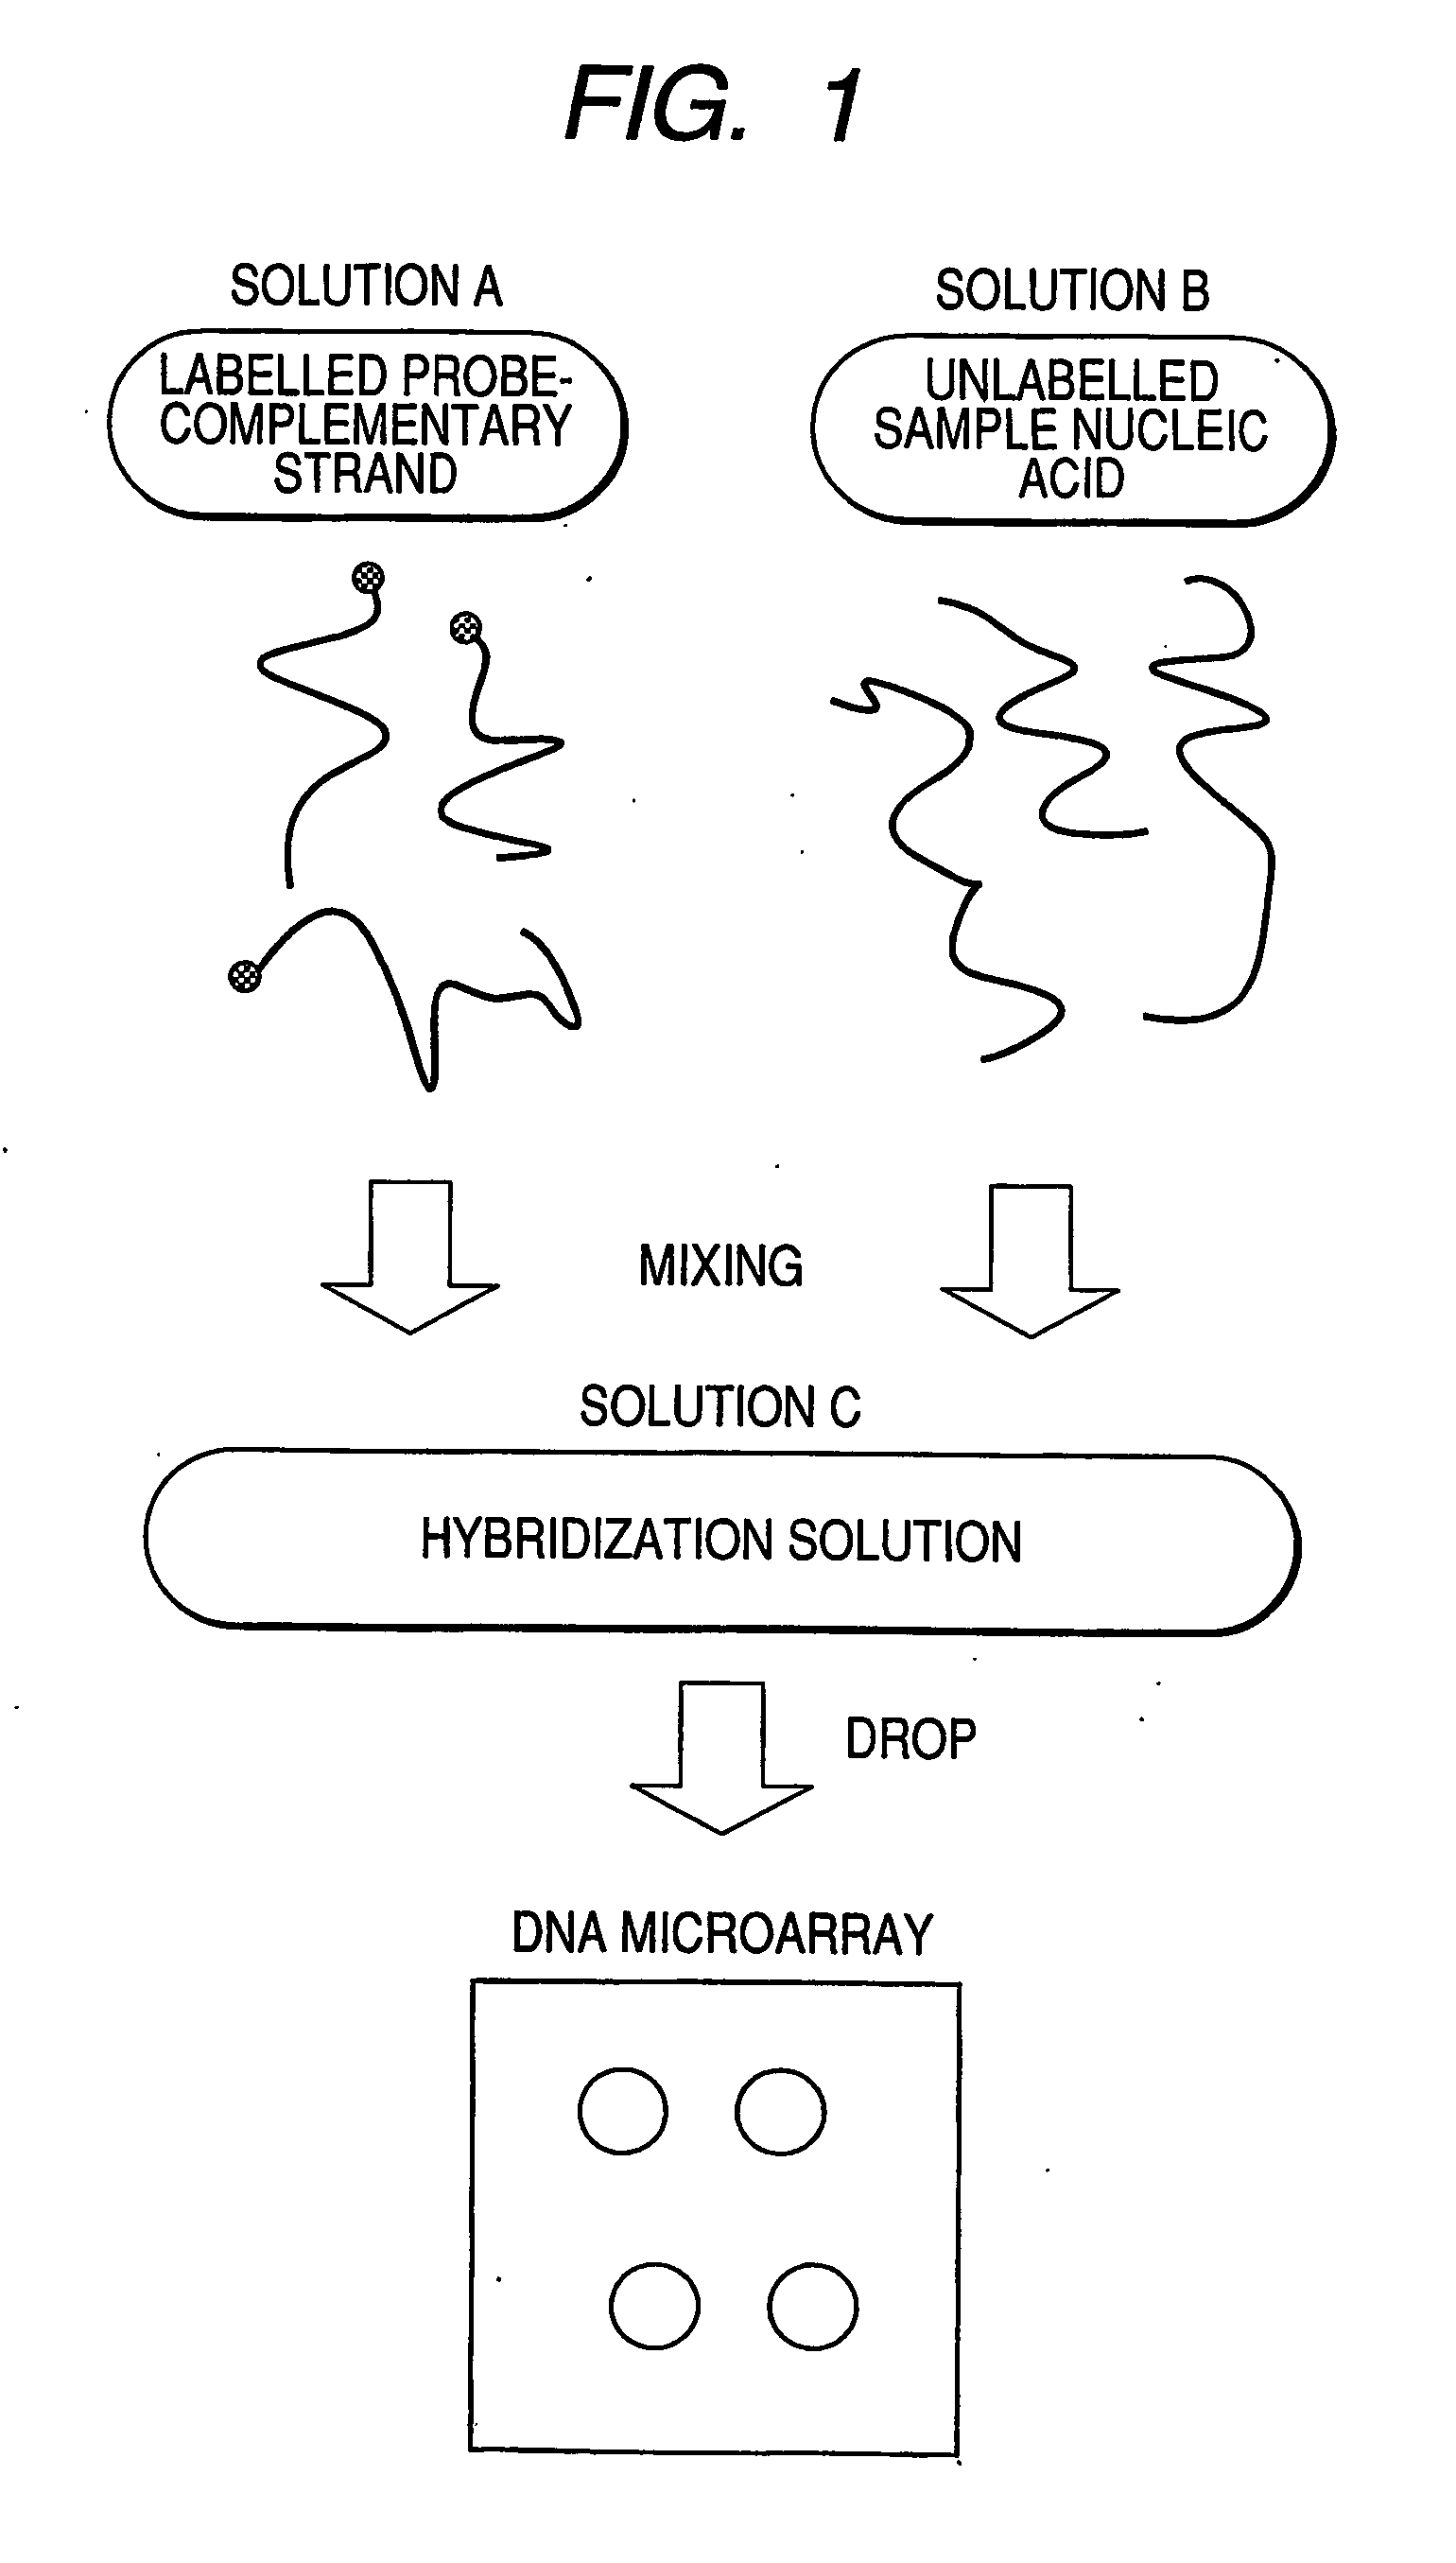 Process for assay of nucleic acids by competitive hybridization using a dna microarray